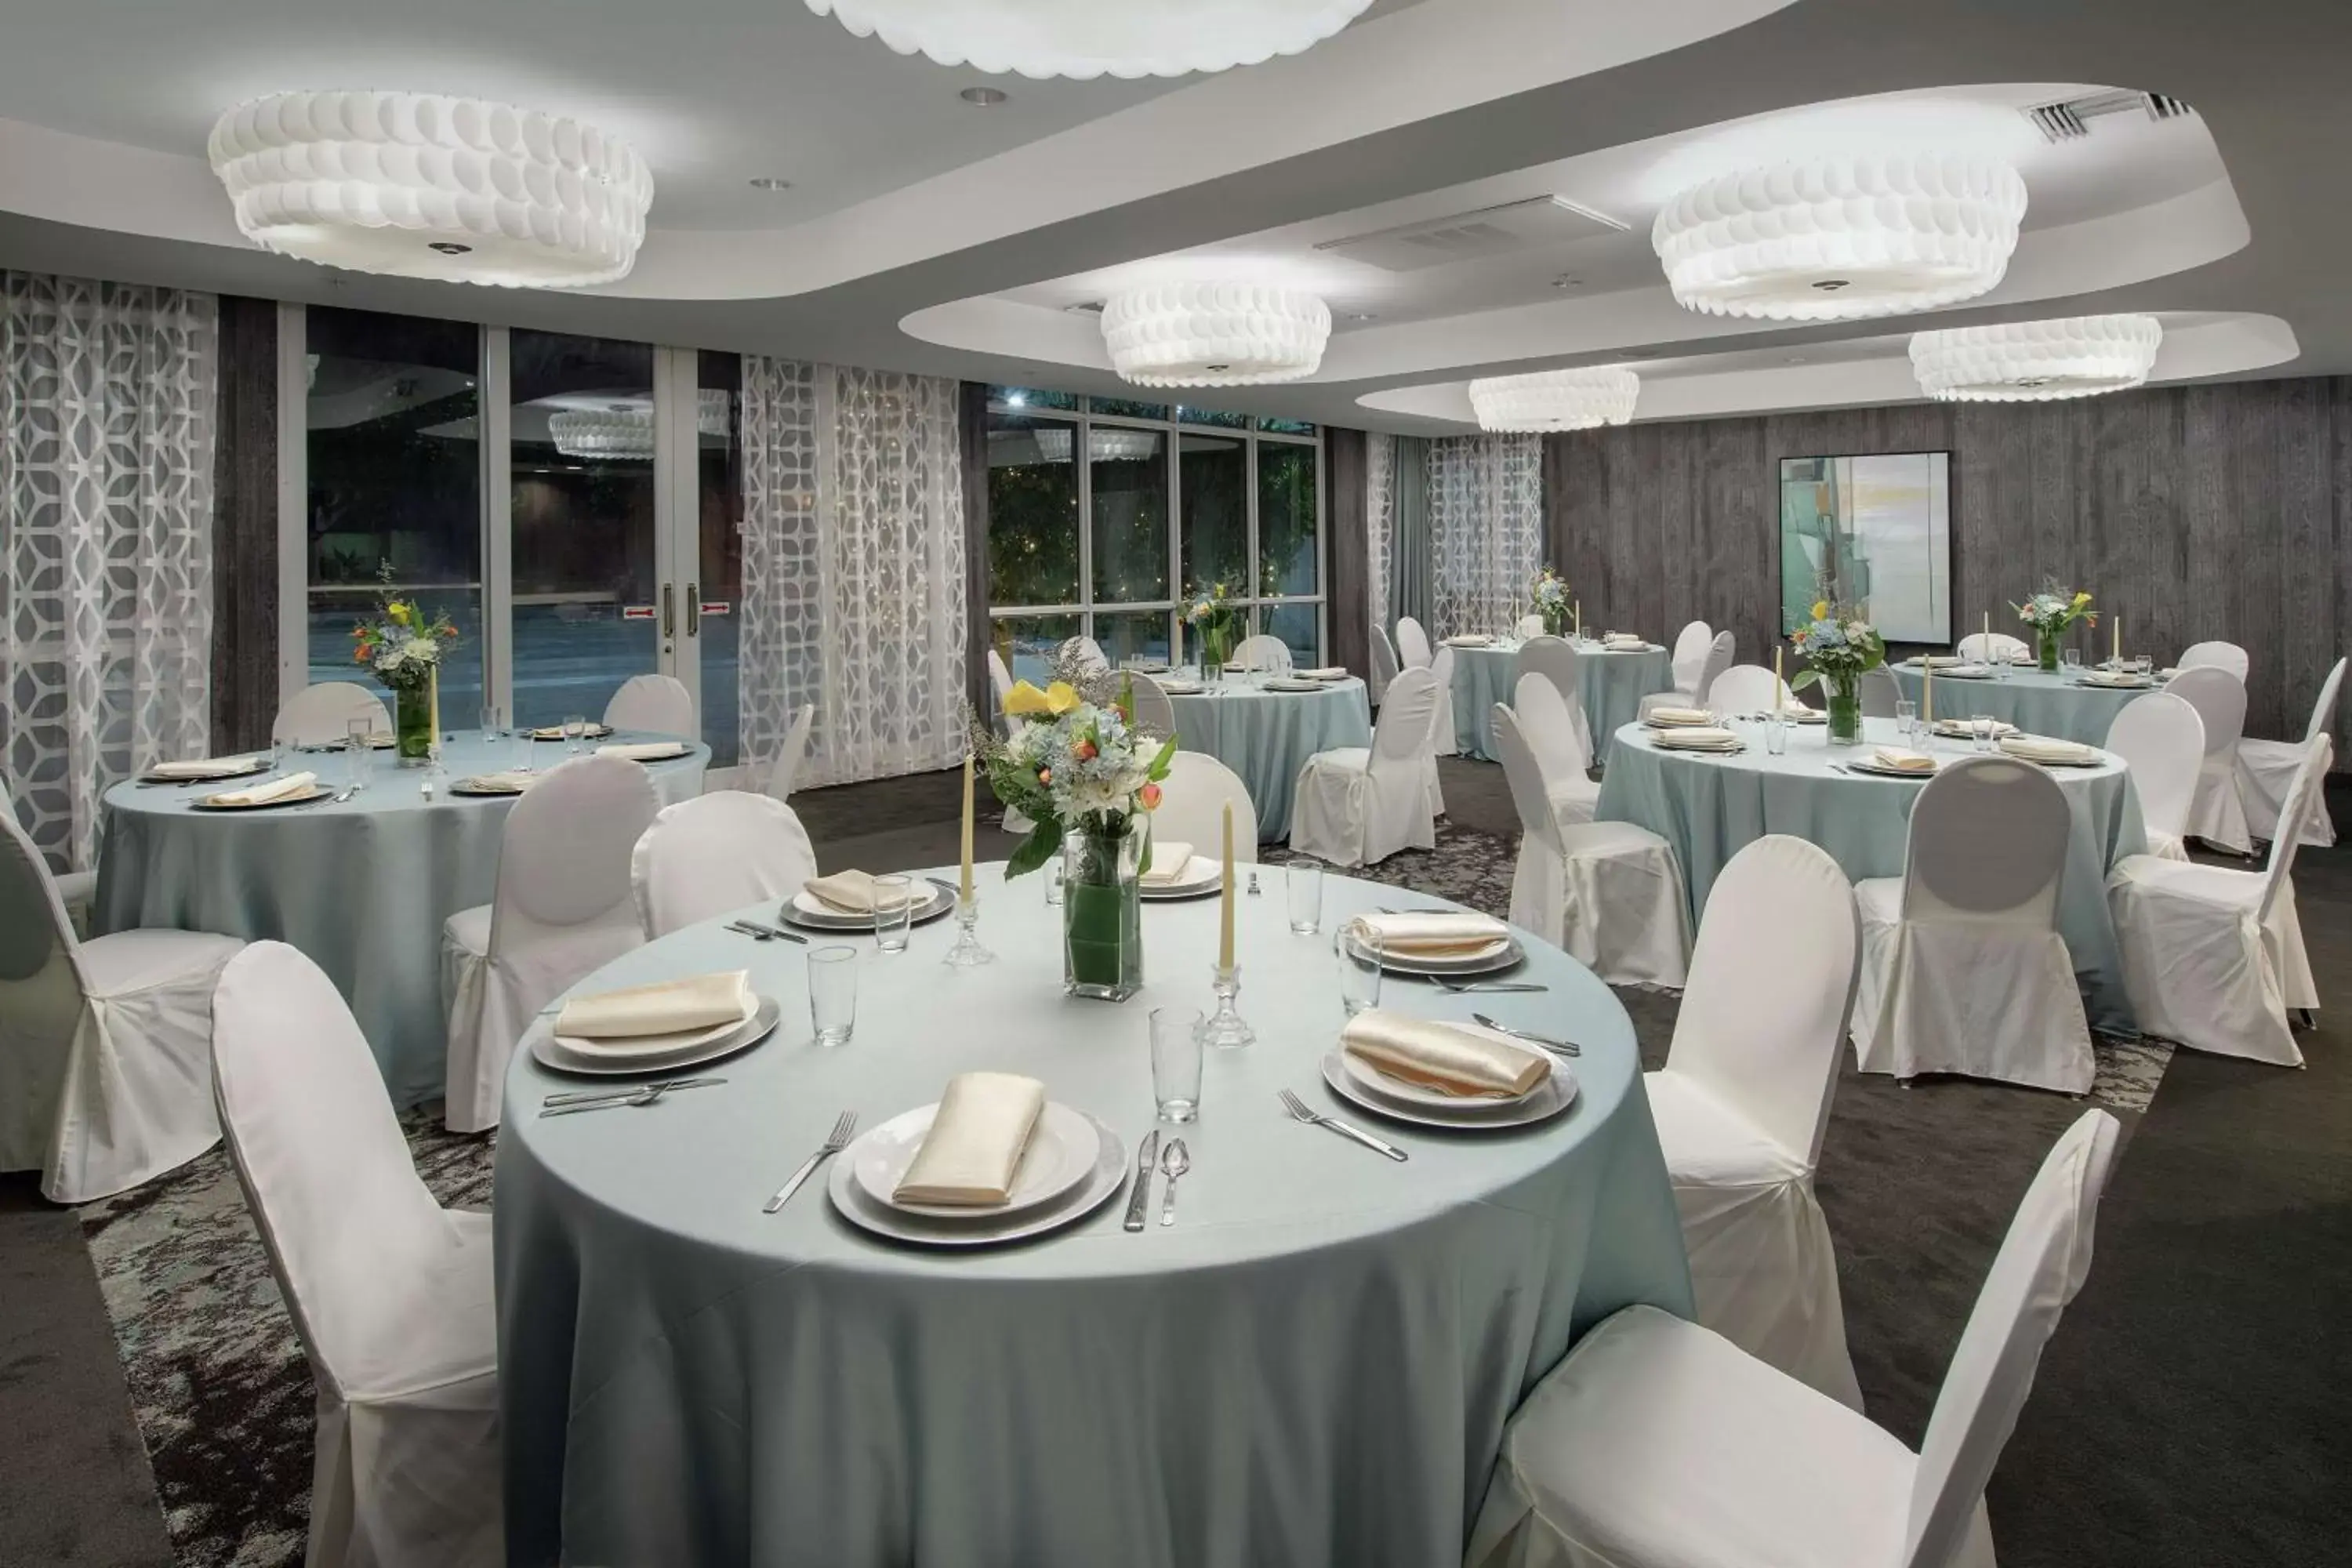 Meeting/conference room, Banquet Facilities in Hilton Garden Inn Miami Brickell South